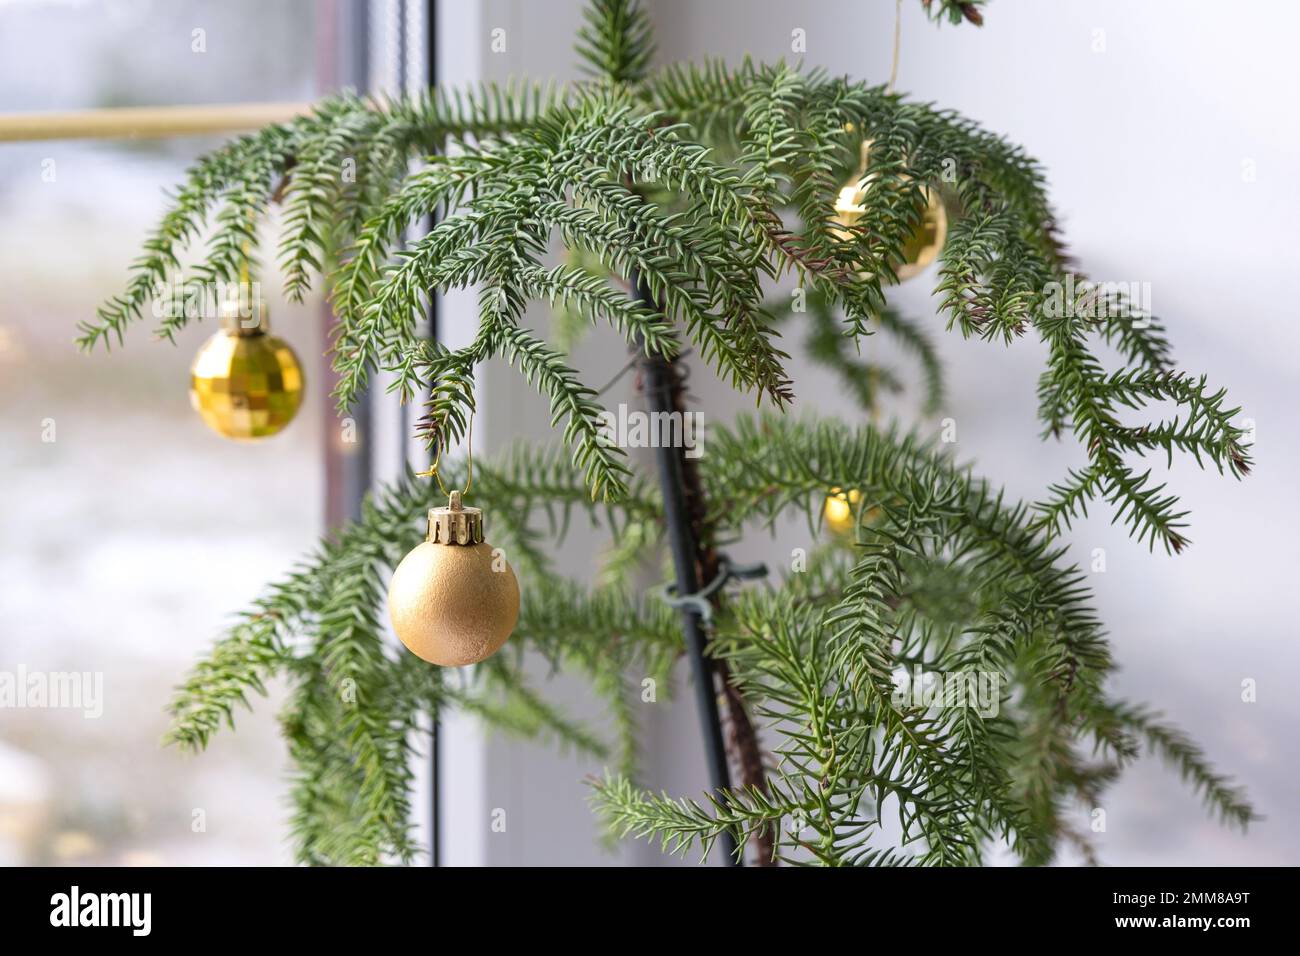 Araucaria house plant is a room spruce decorated with Christmas balls like a Christmas tree by the window. Green home interior decor Stock Photo